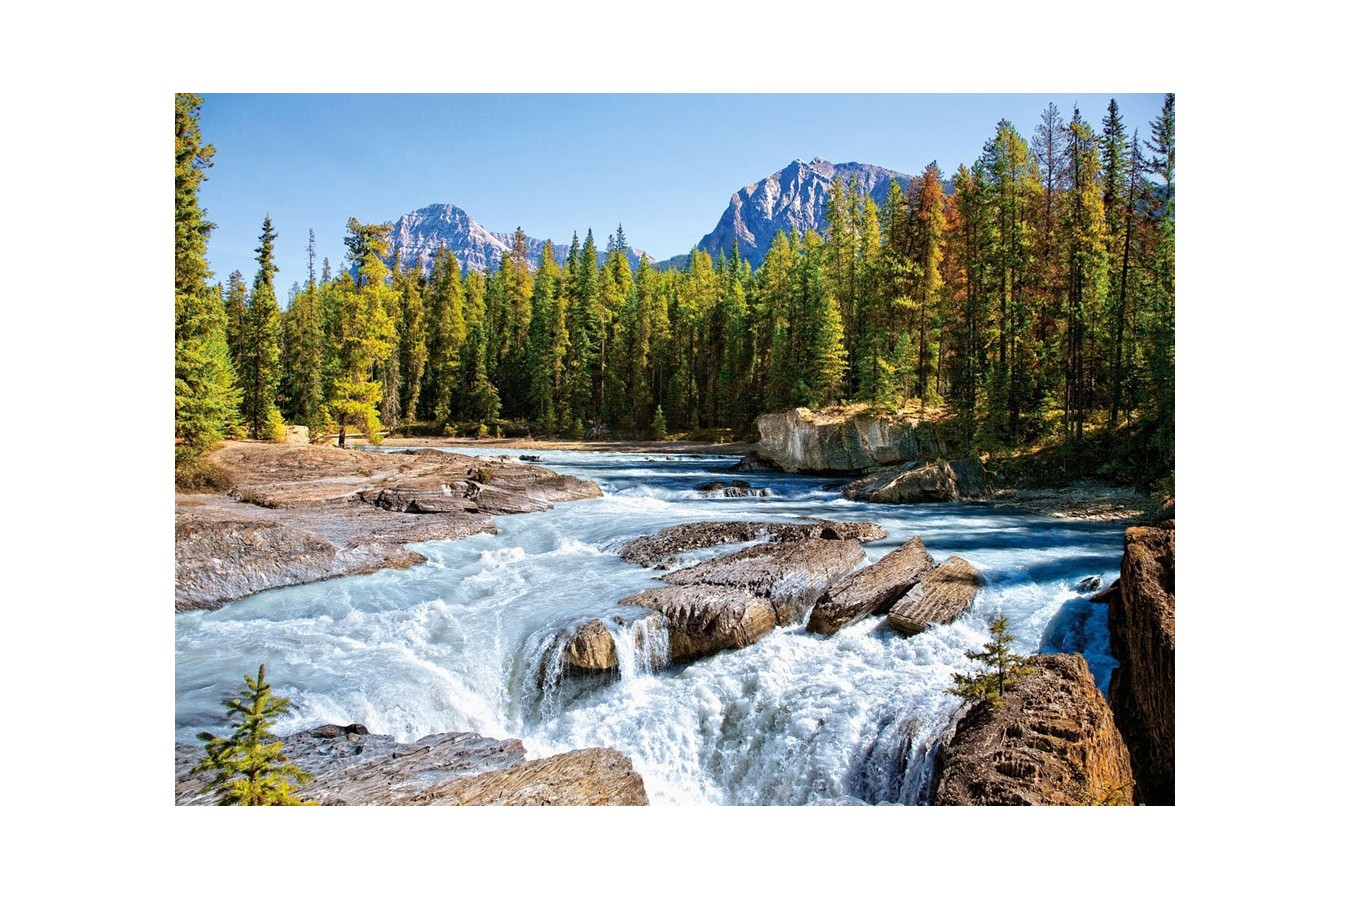 Puzzle Castorland - Athabasca River, Jasper National Park Canada, 1500 piese